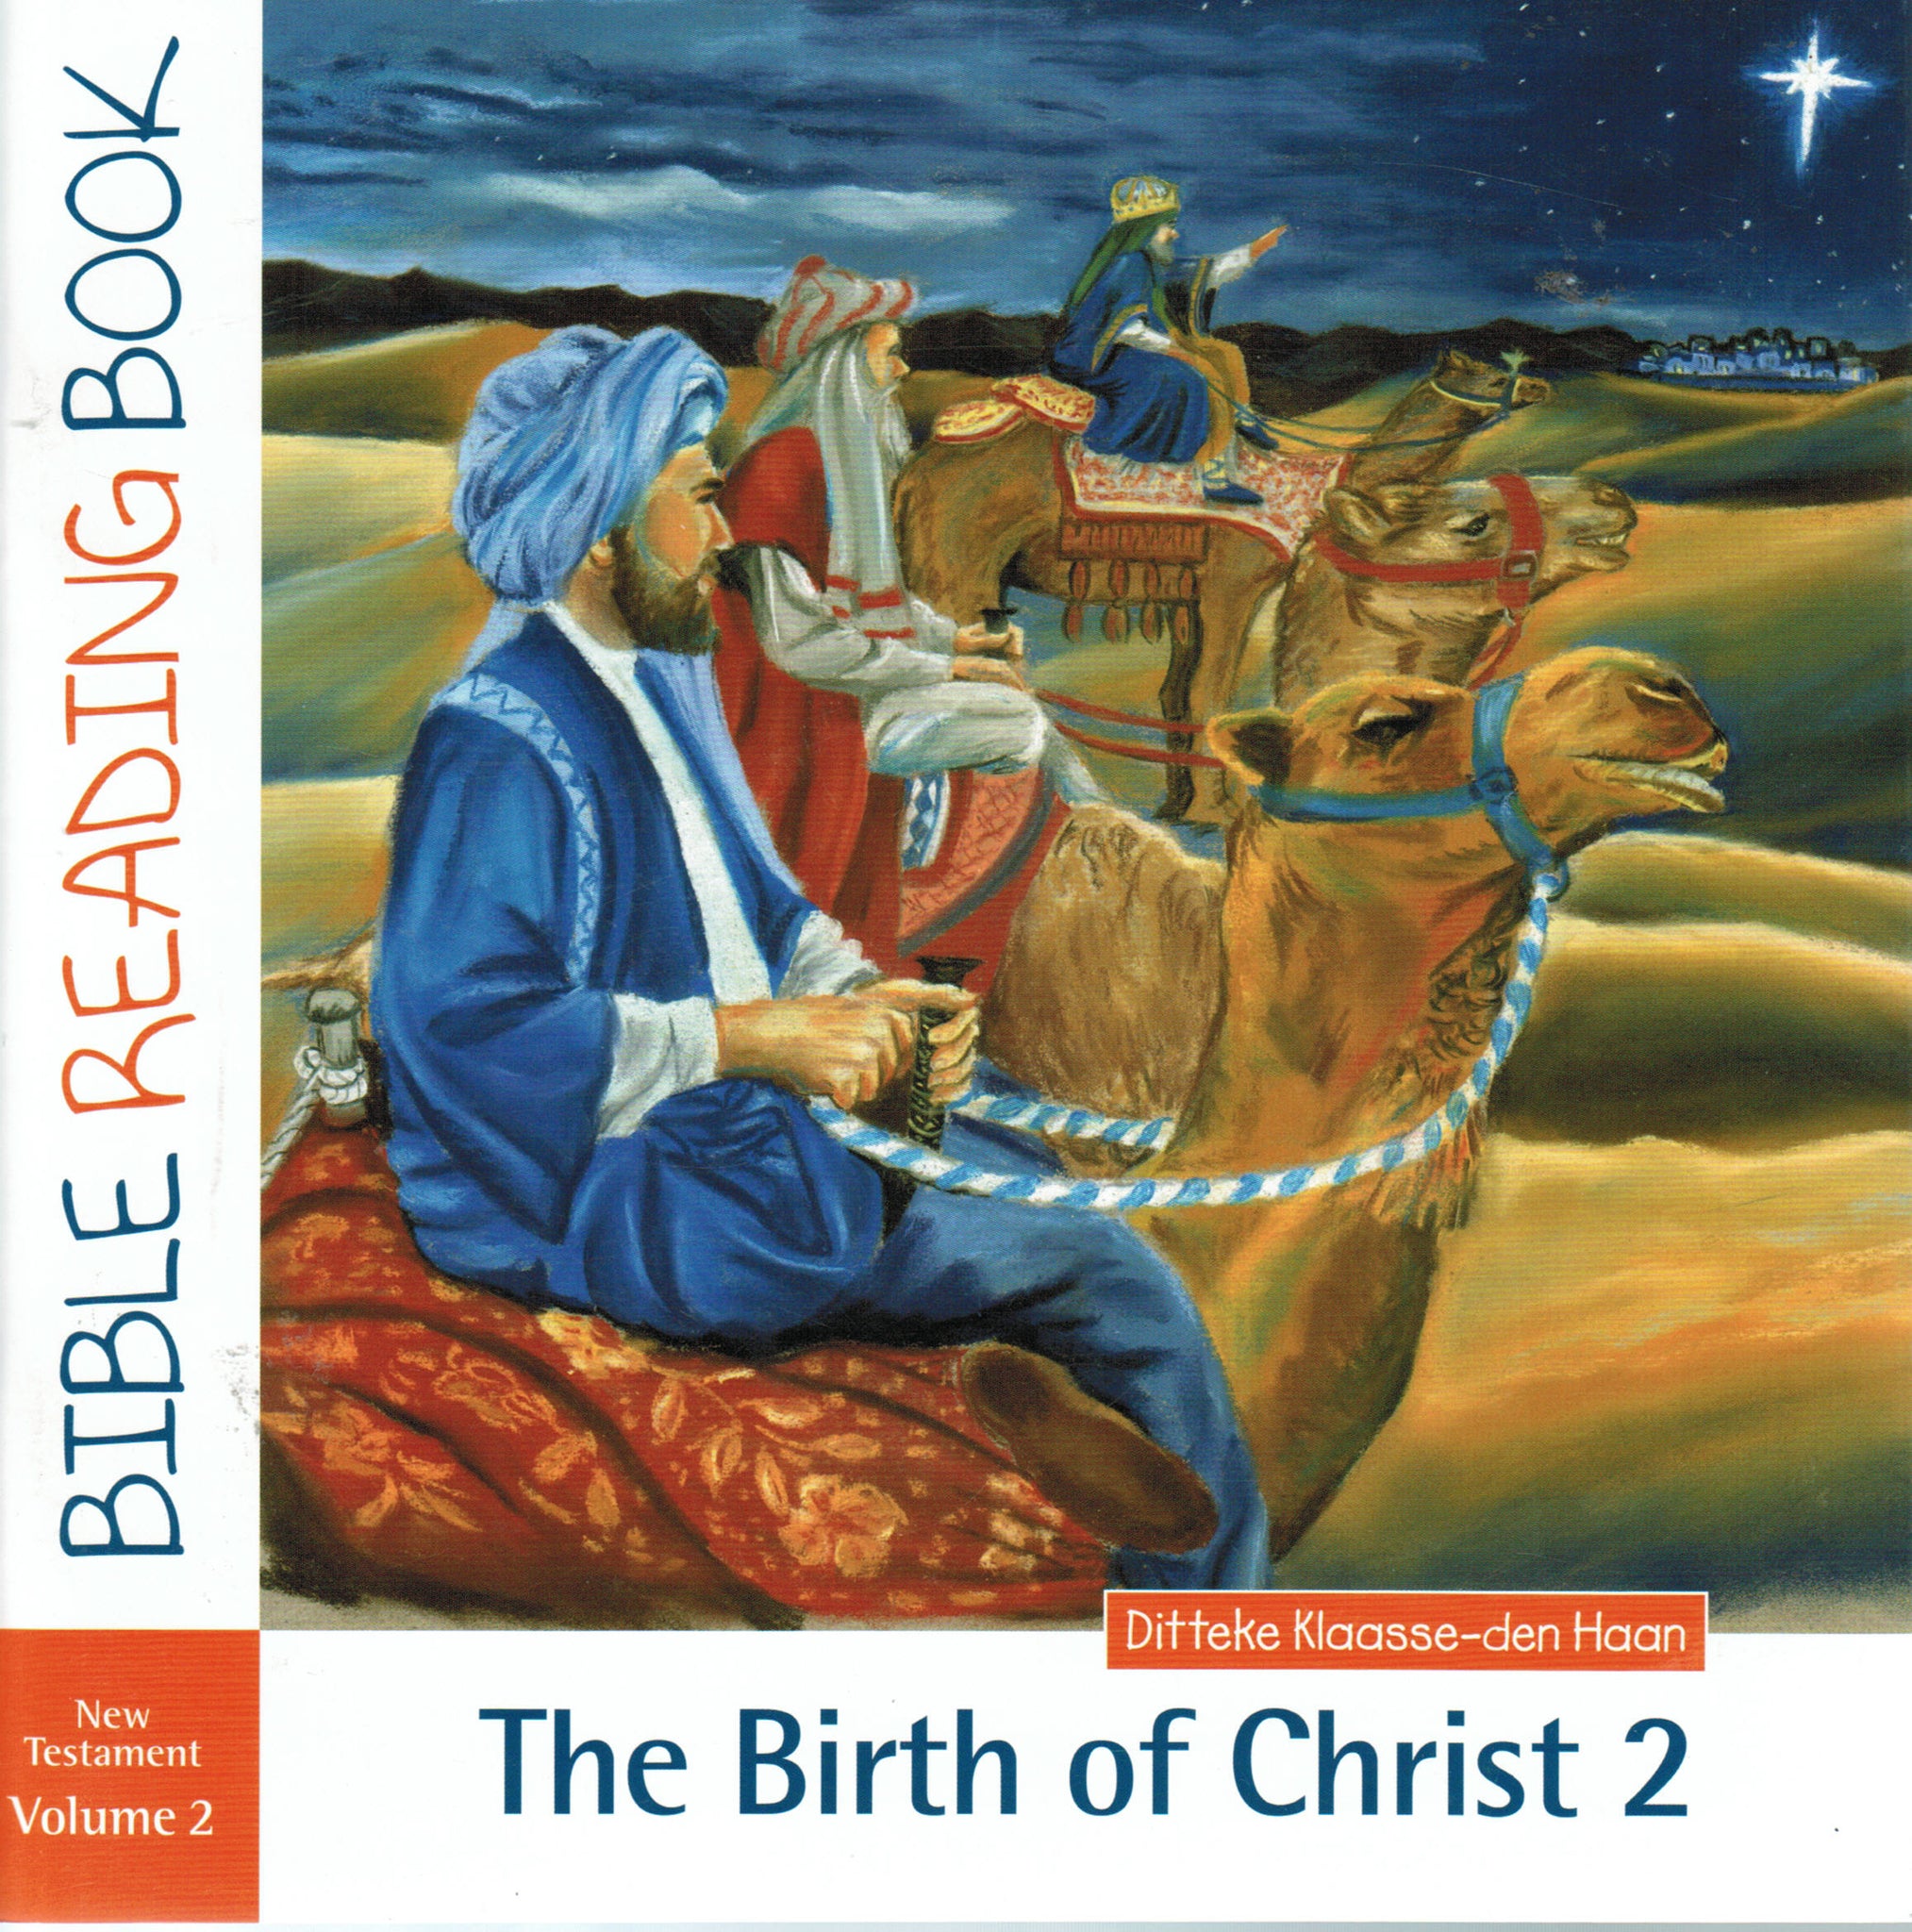 Bible Reading Book NT Volume 2 - The Birth of Christ 2